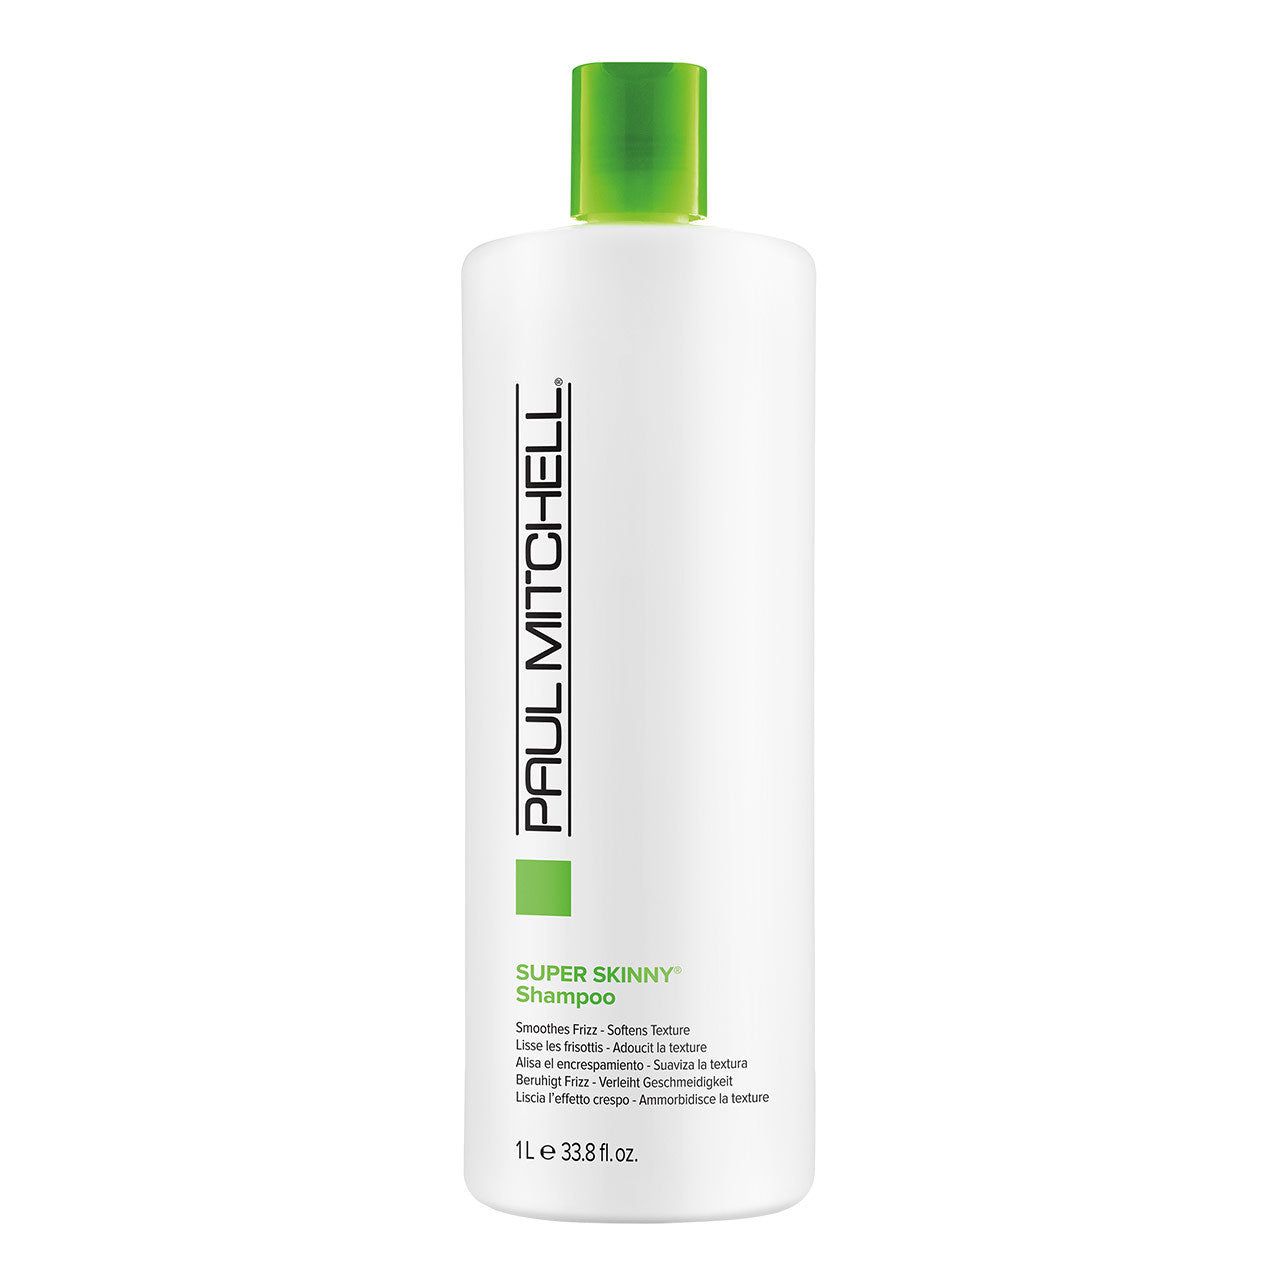 Paul Mitchell Smoothing Super Skinny Shampoo 1 Litre